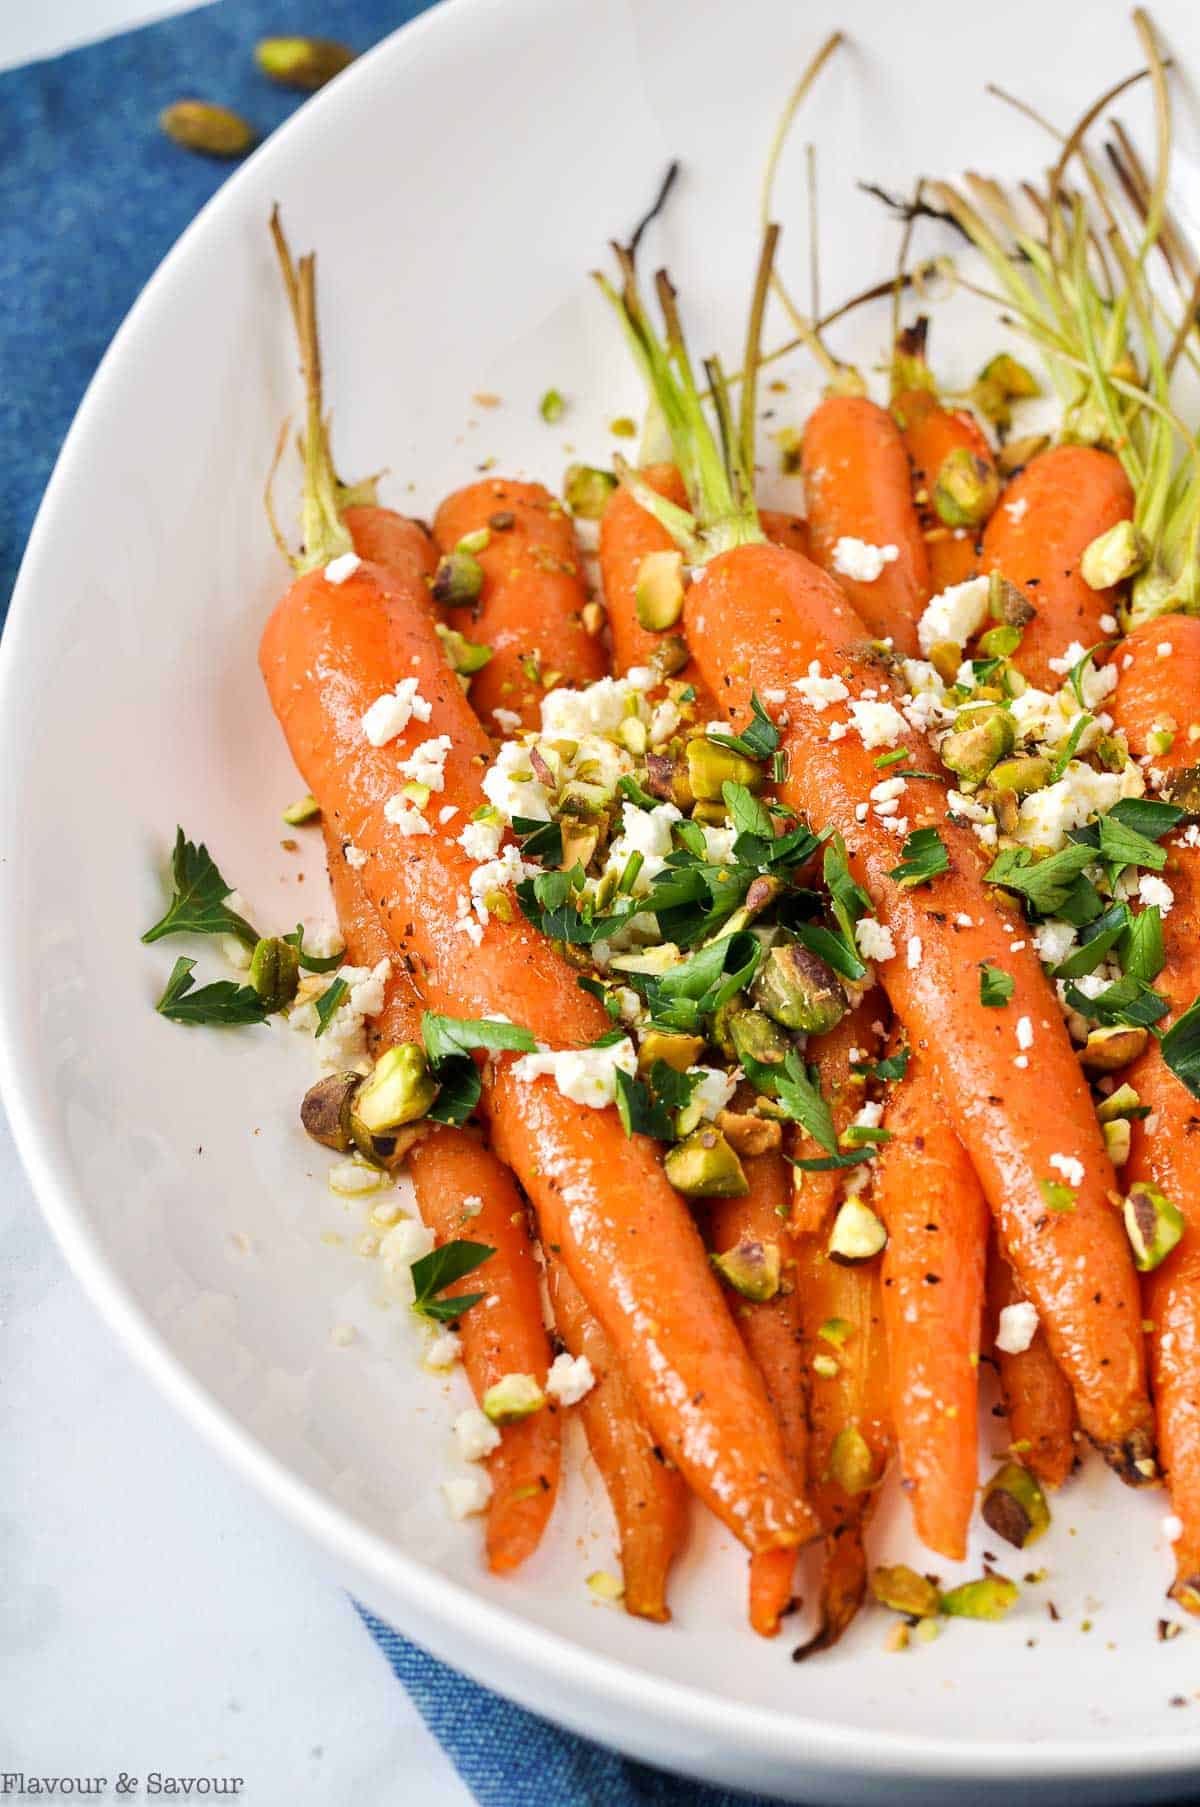 Oven roasted carrots in a white oval dish topped with feta cheese, pistachios and parsley.